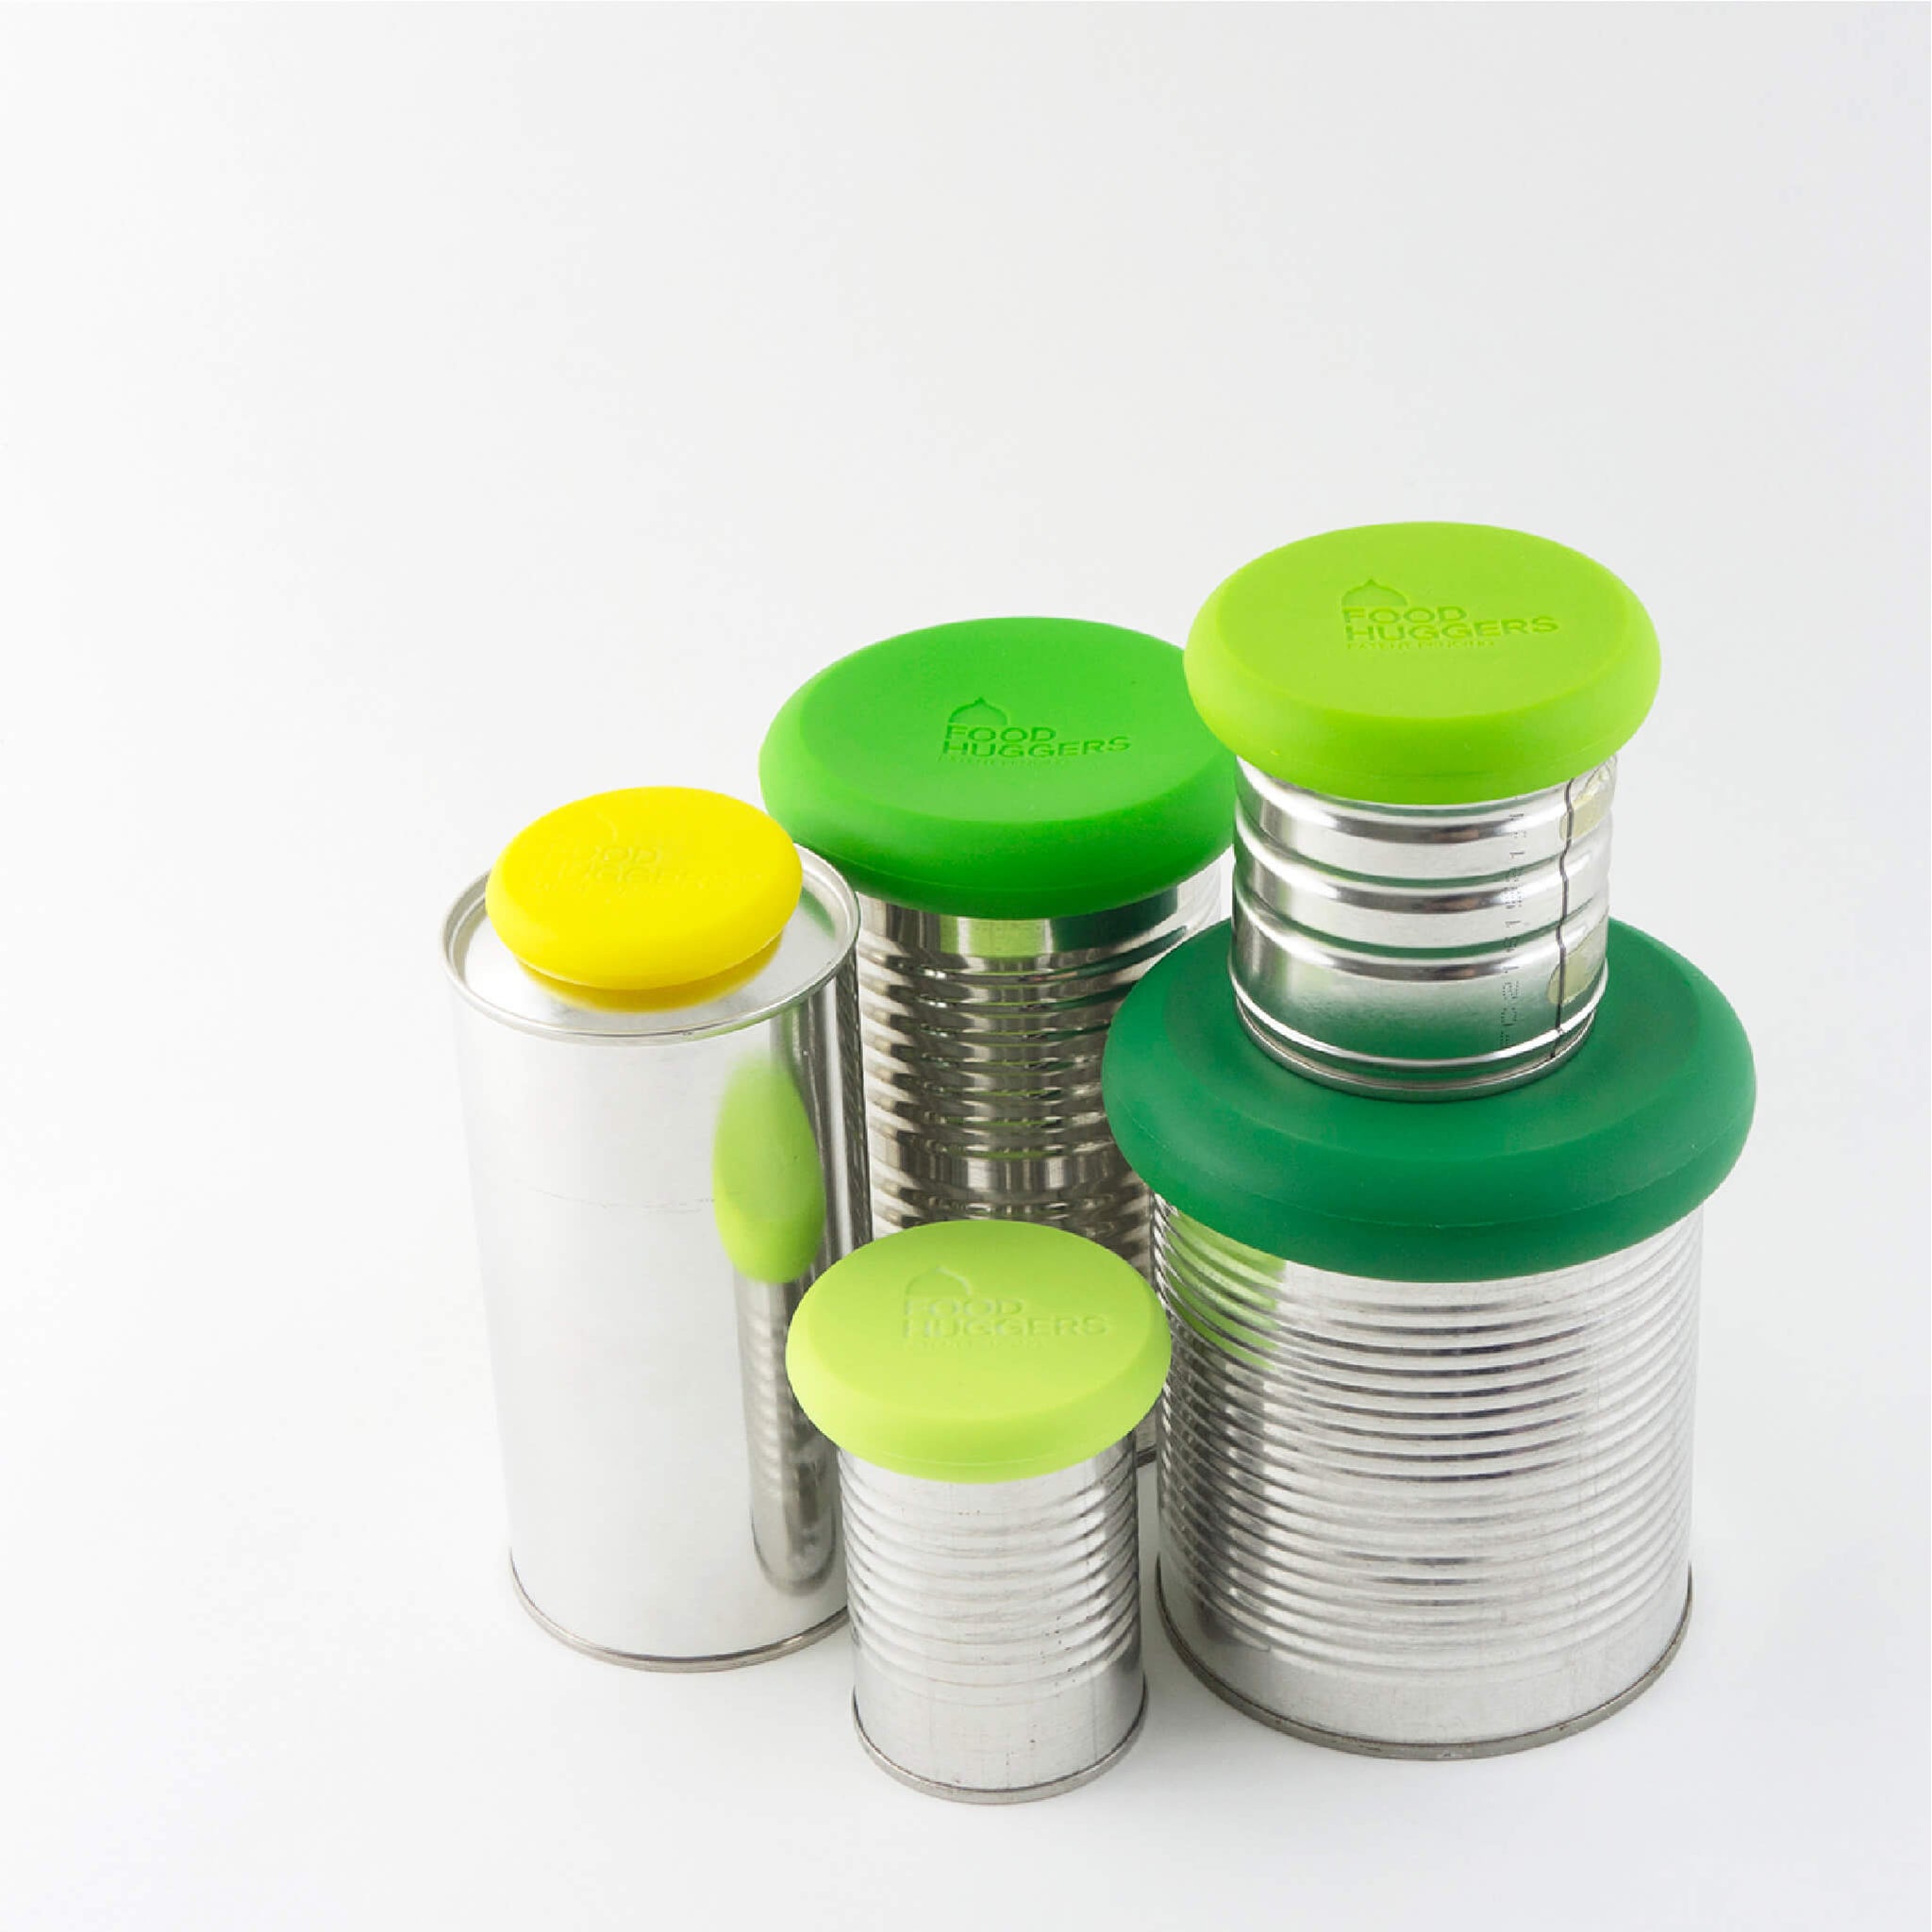 Food Huggers green range being used as lids for cans.